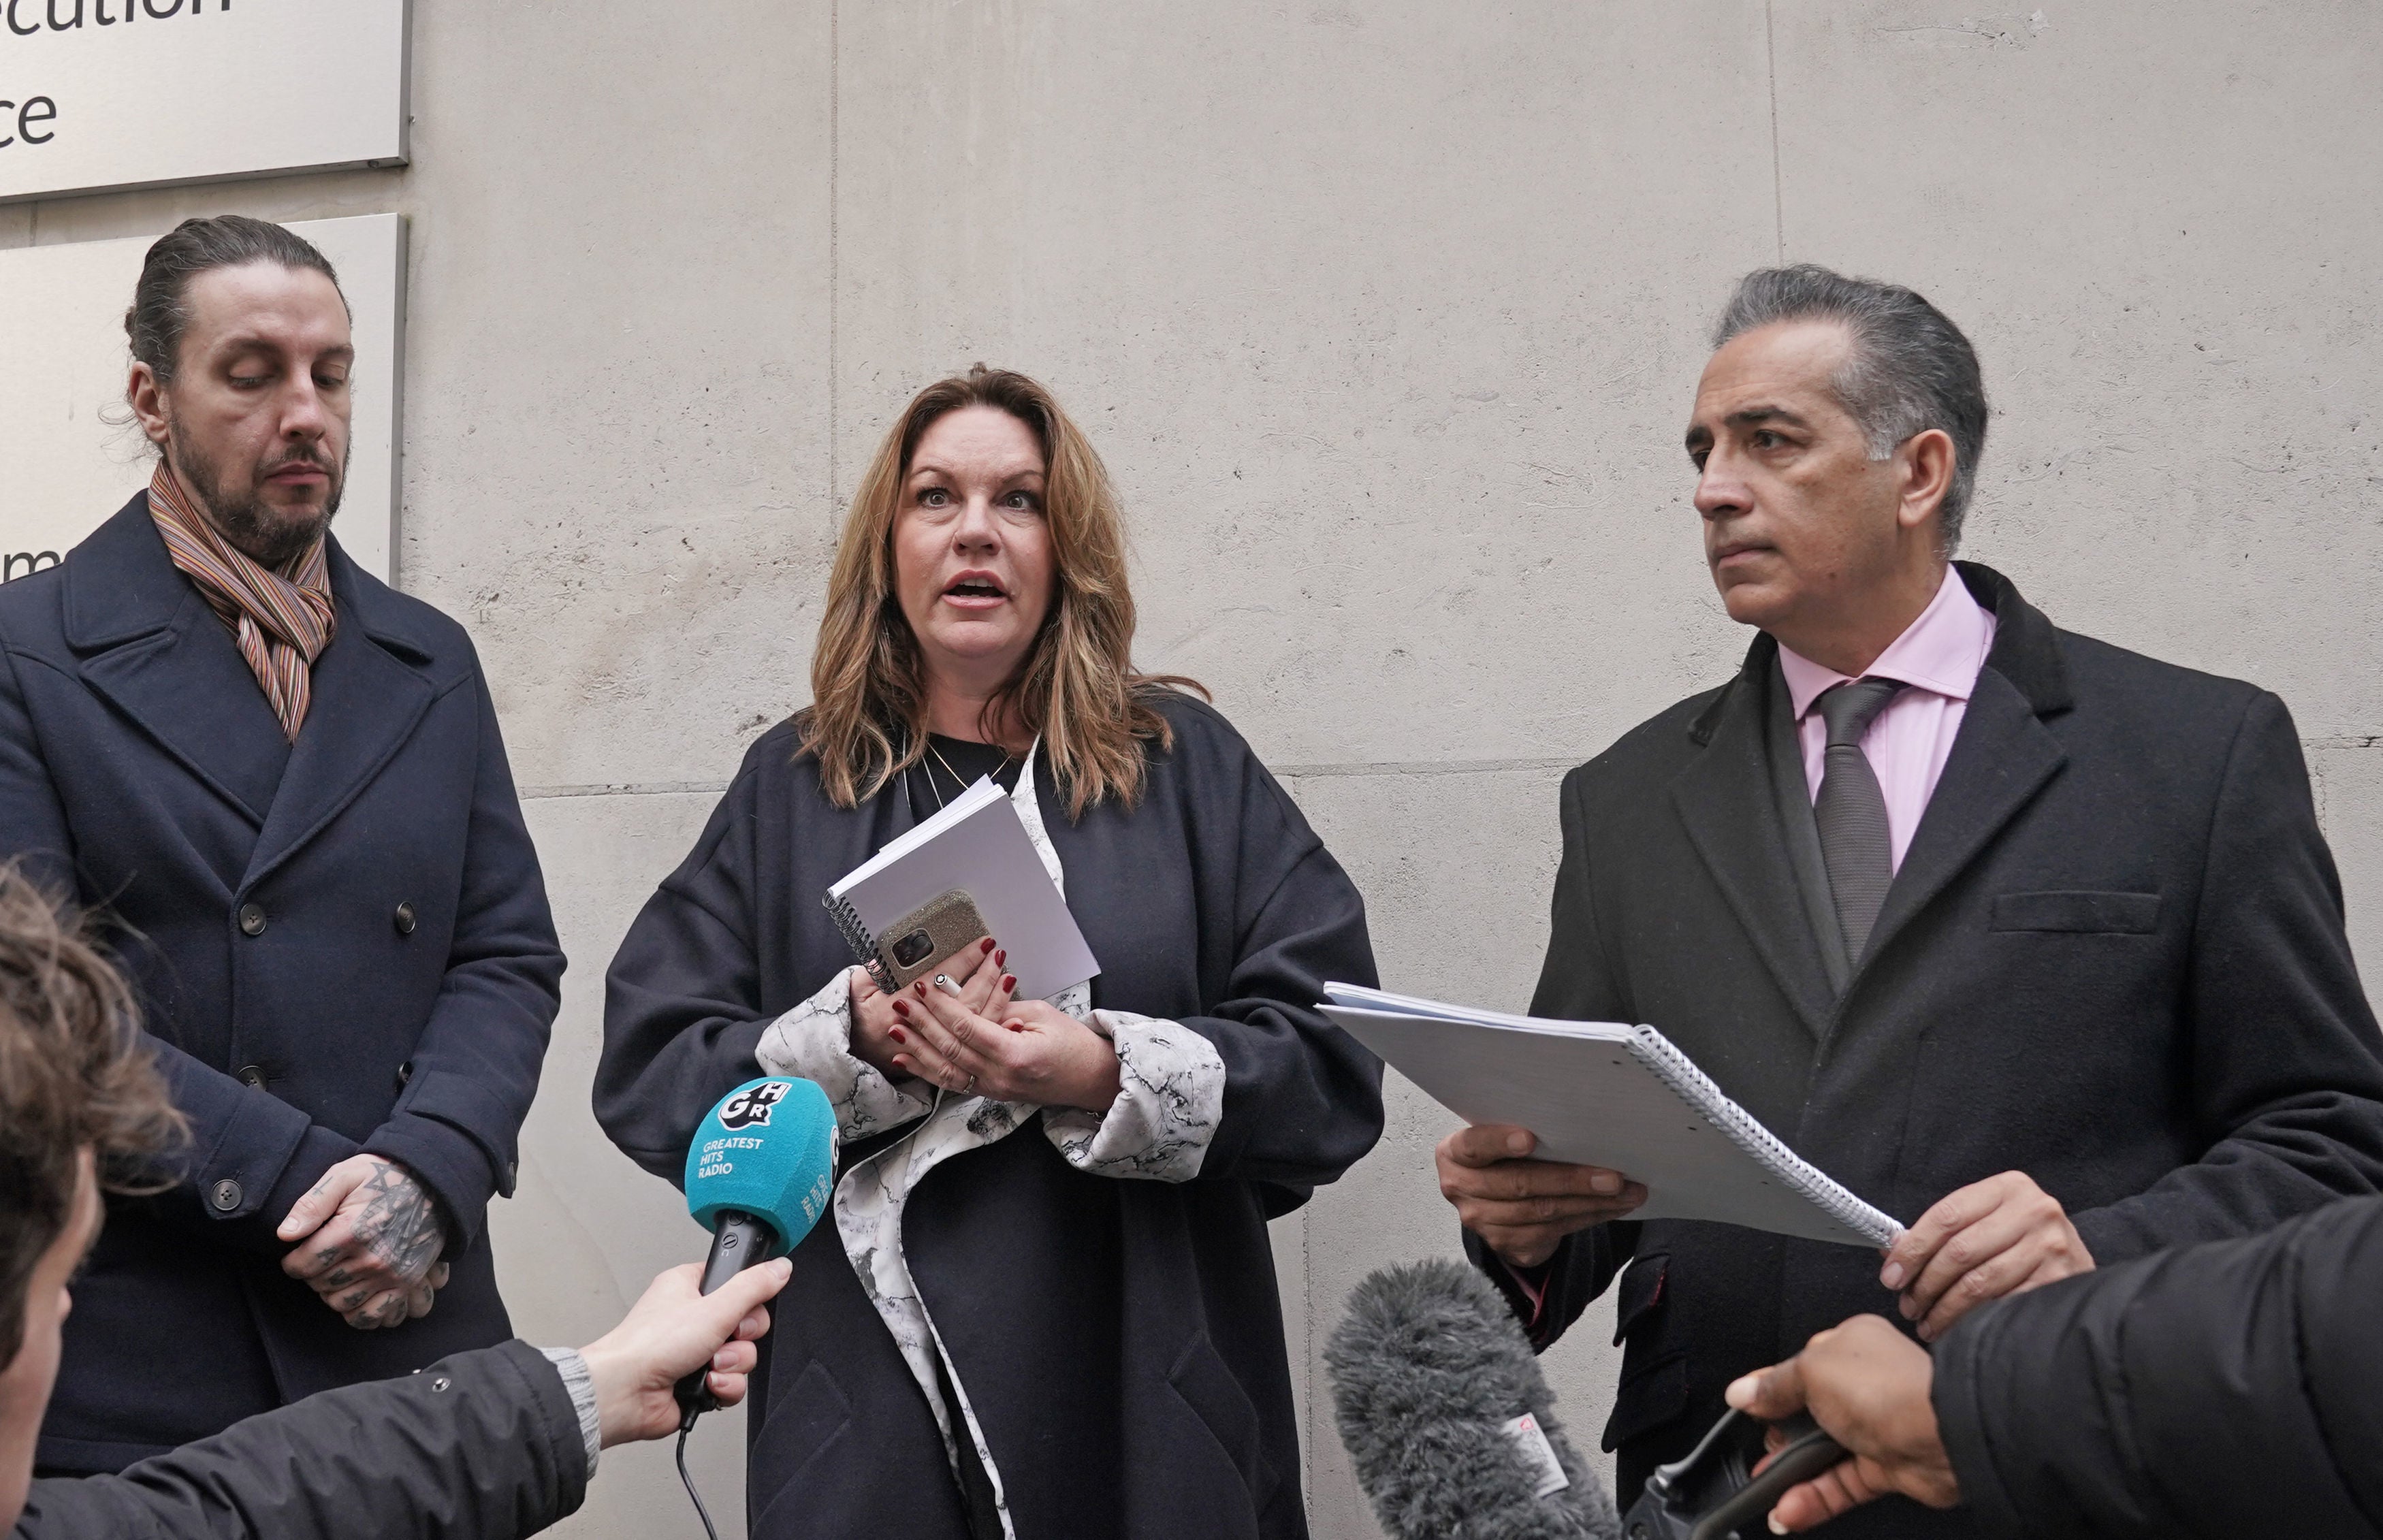 James Coates, son of Ian Coates, Emma Webber, mother of Barnaby Webber and Dr Sanjoy Kumar, father of Grace O'Malley-Kumar speak to the media in London